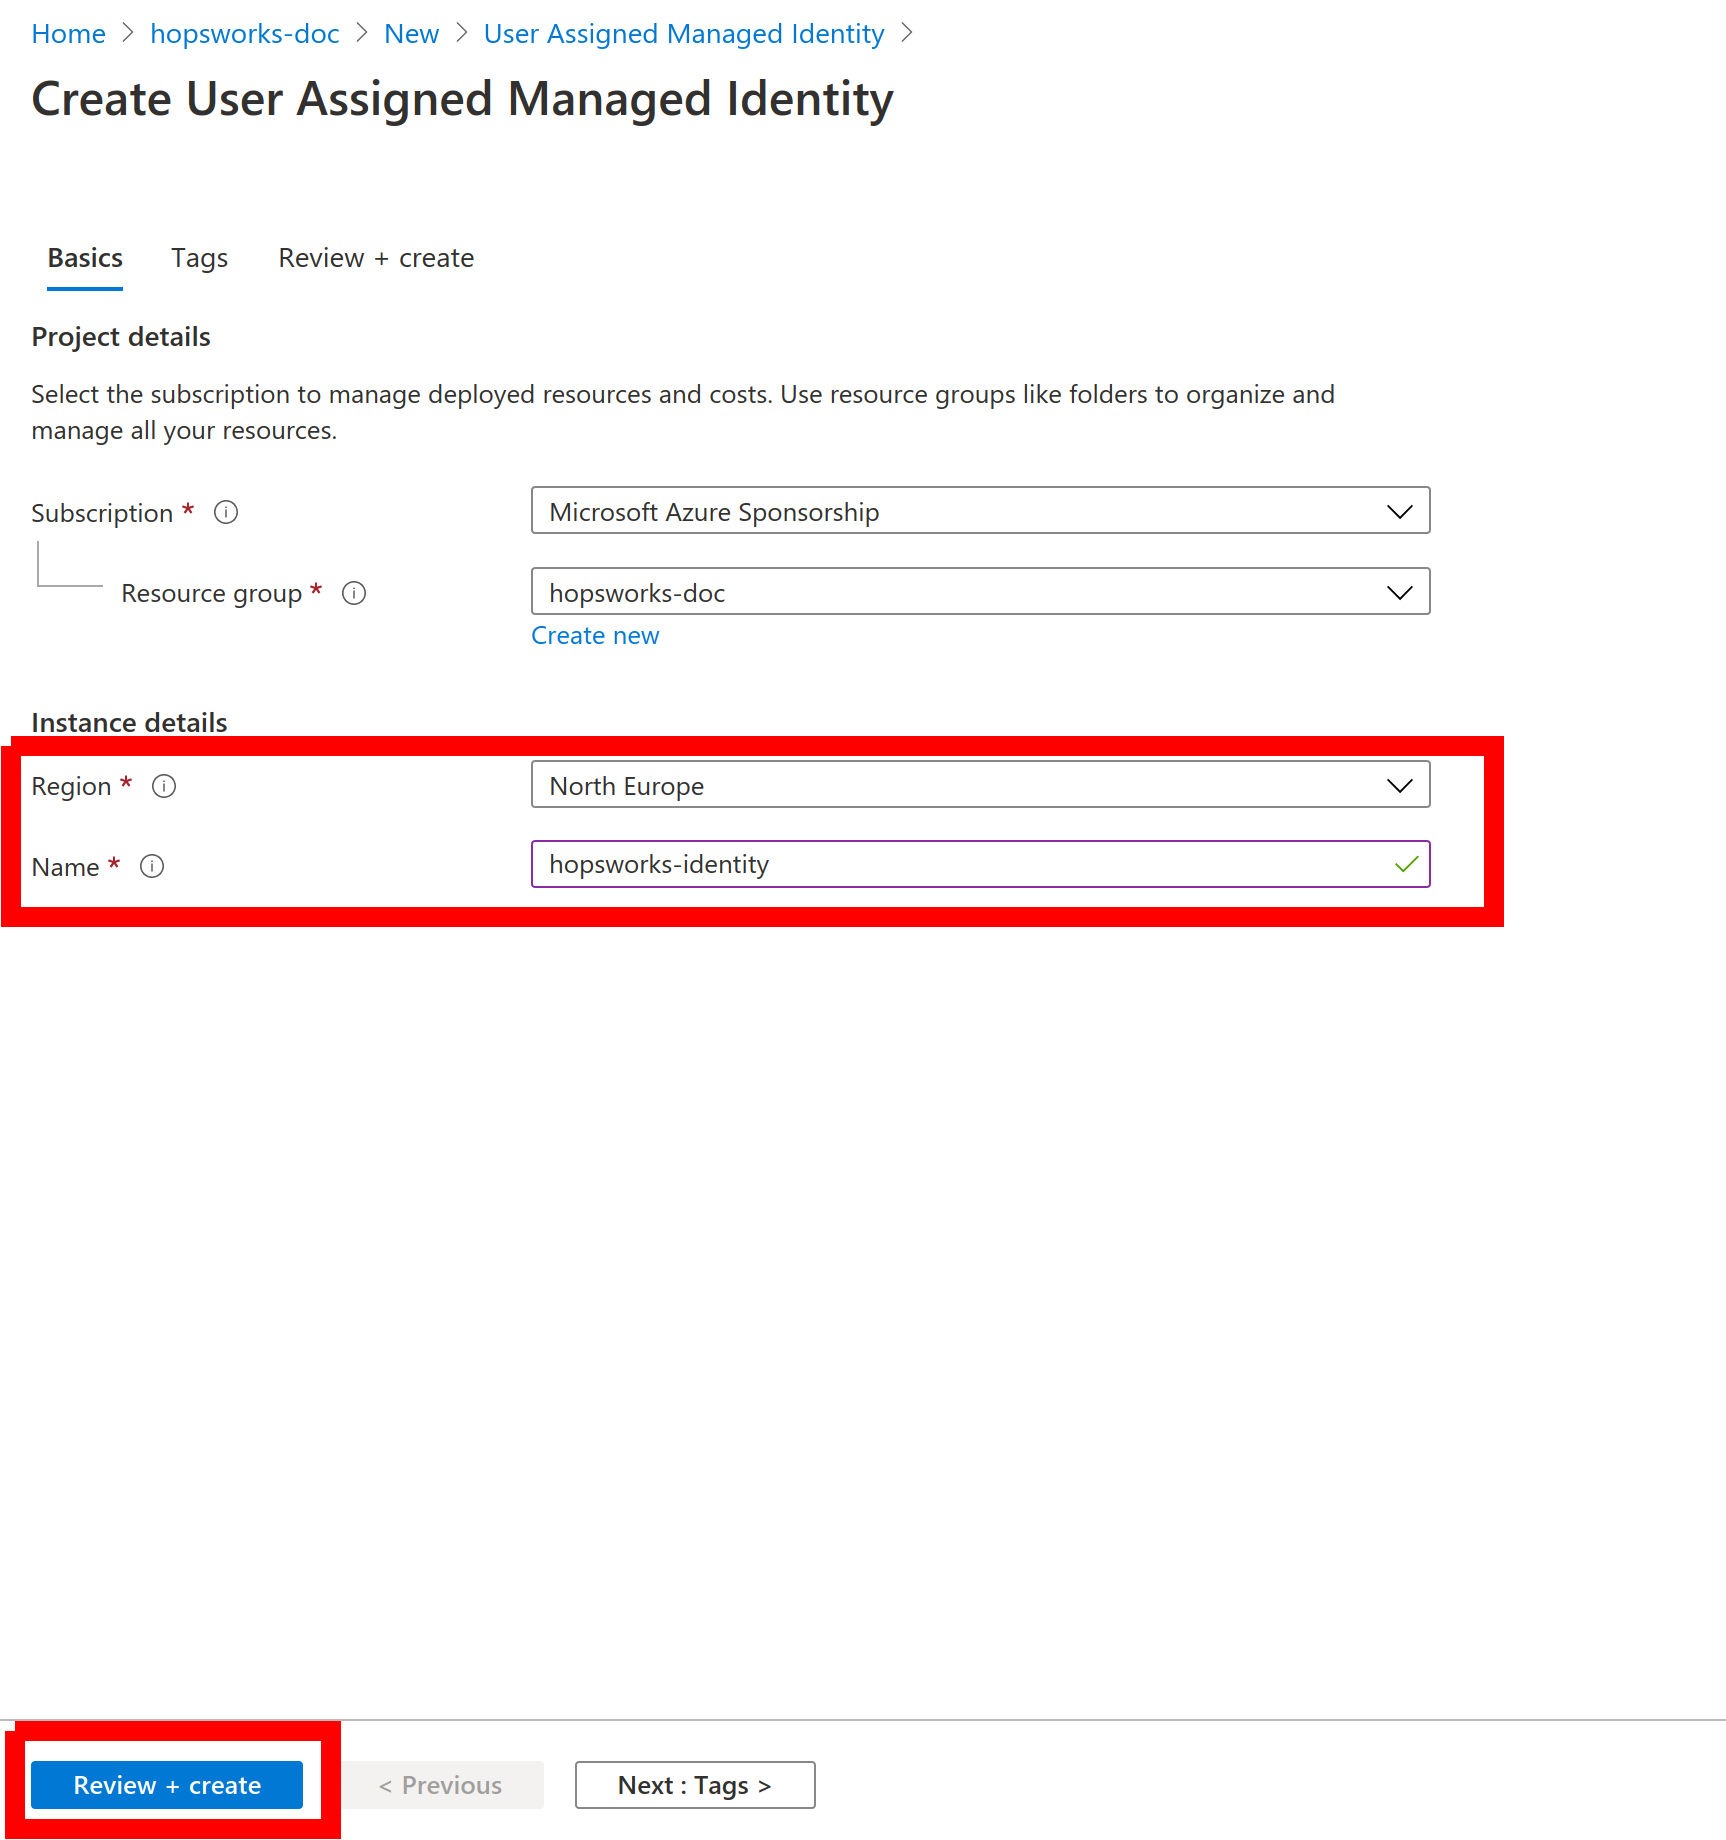 Create a User Assigned Managed Identity